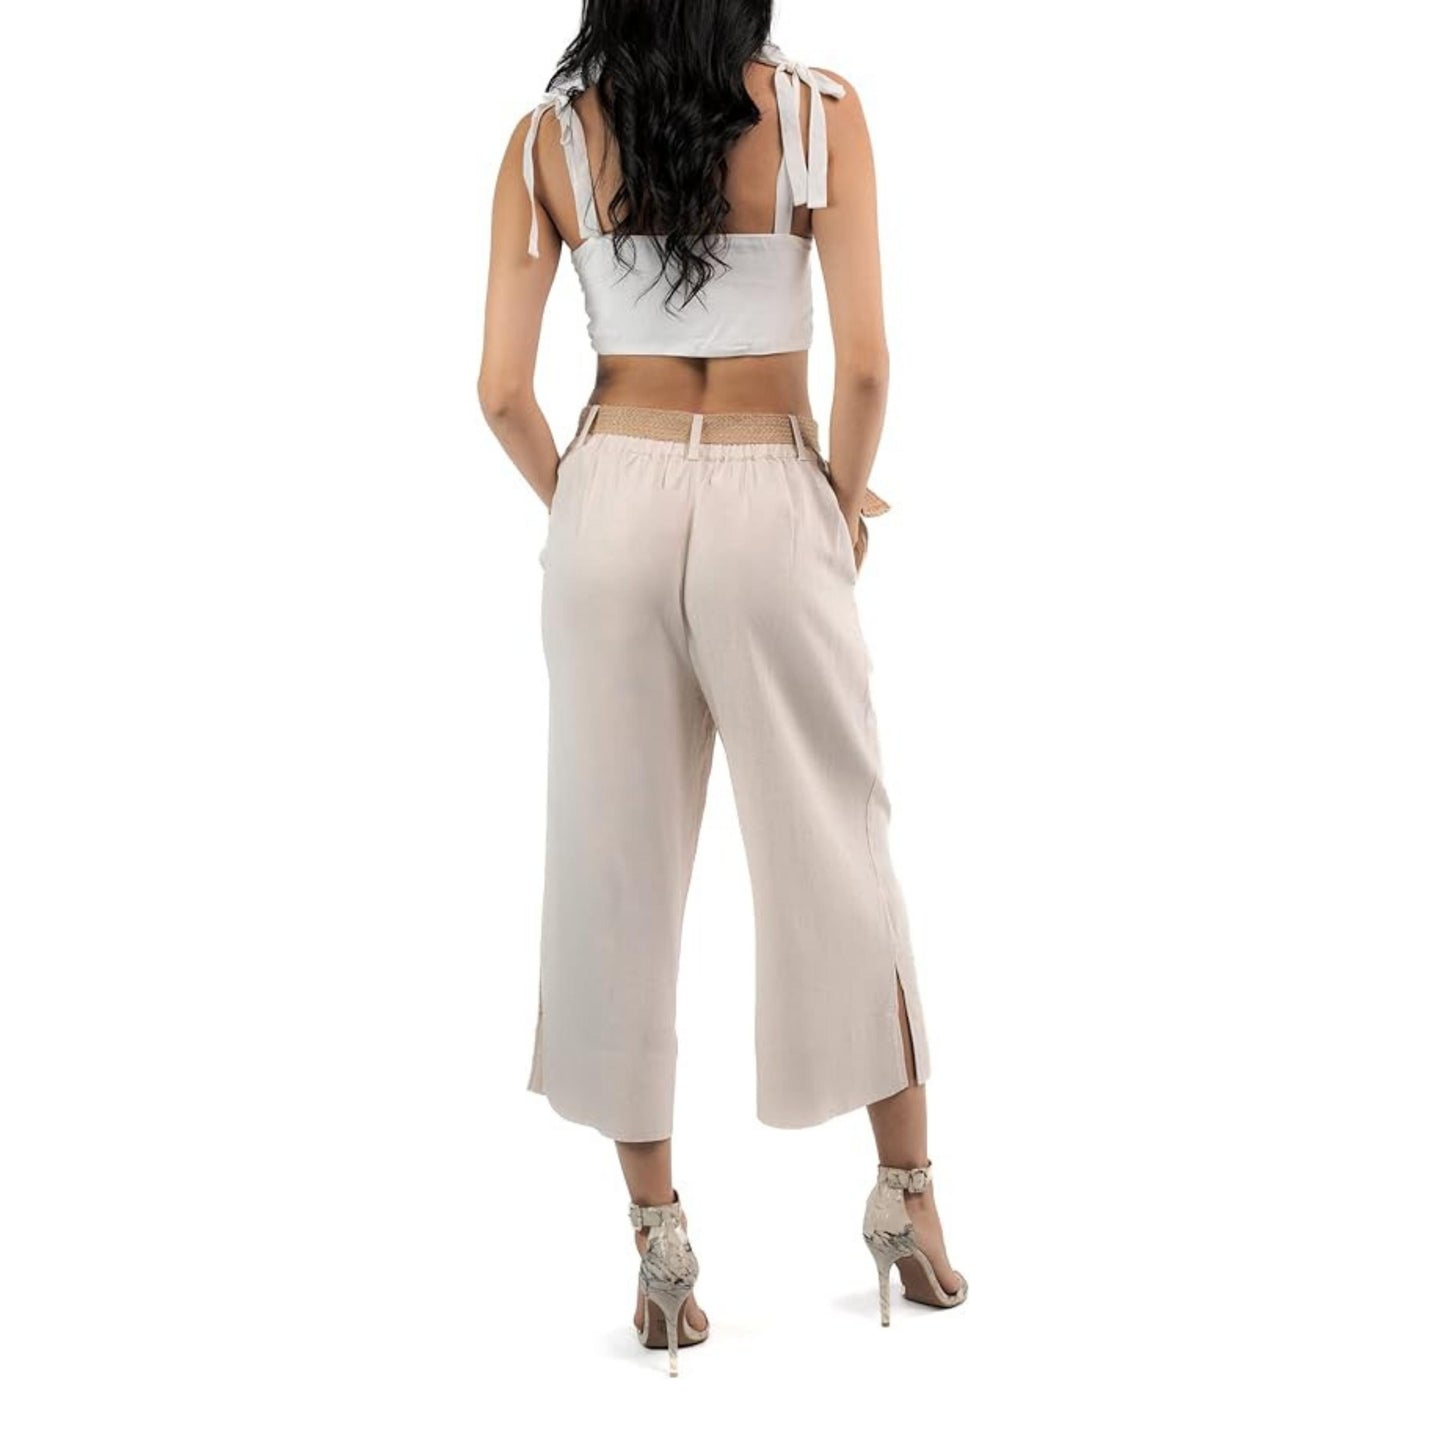 Women's Wide Leg Capri Pants Casual Dressy Work Culottes Pant with Bel –  Sandy and Sid